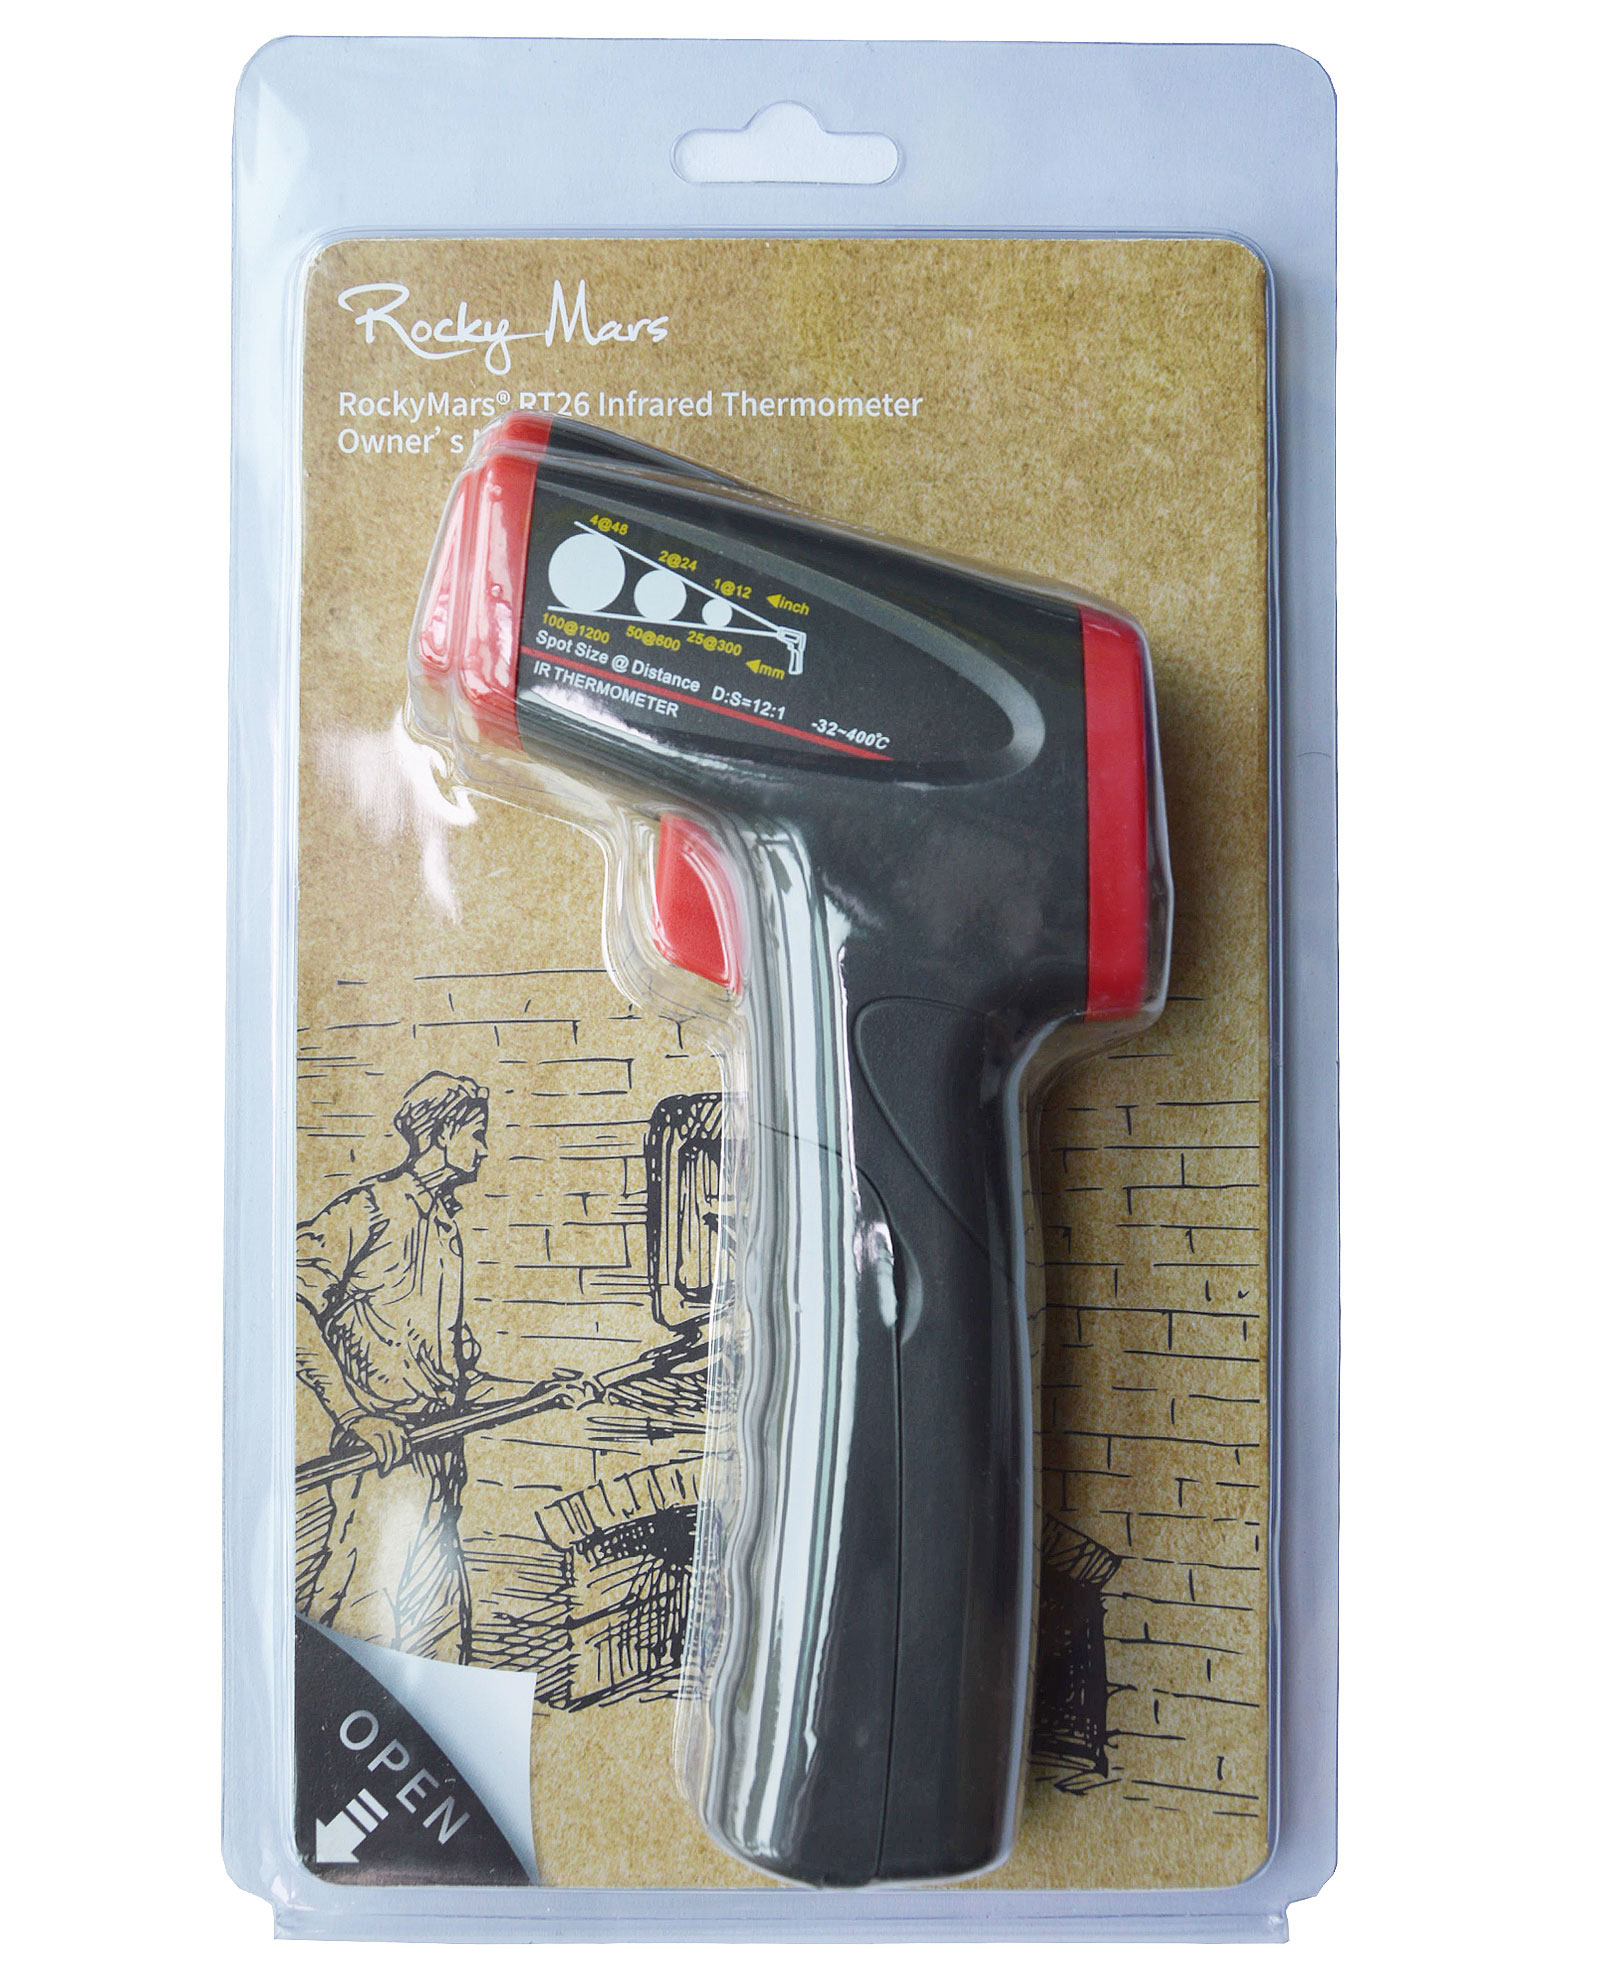 Mechanical Rocky Mars RockyMars RT26 Non-contact Digital Laser Infrared Thermometer with Laser Sighting for Use in Monitoring Electrical etc HVAC and Automotive Systems 